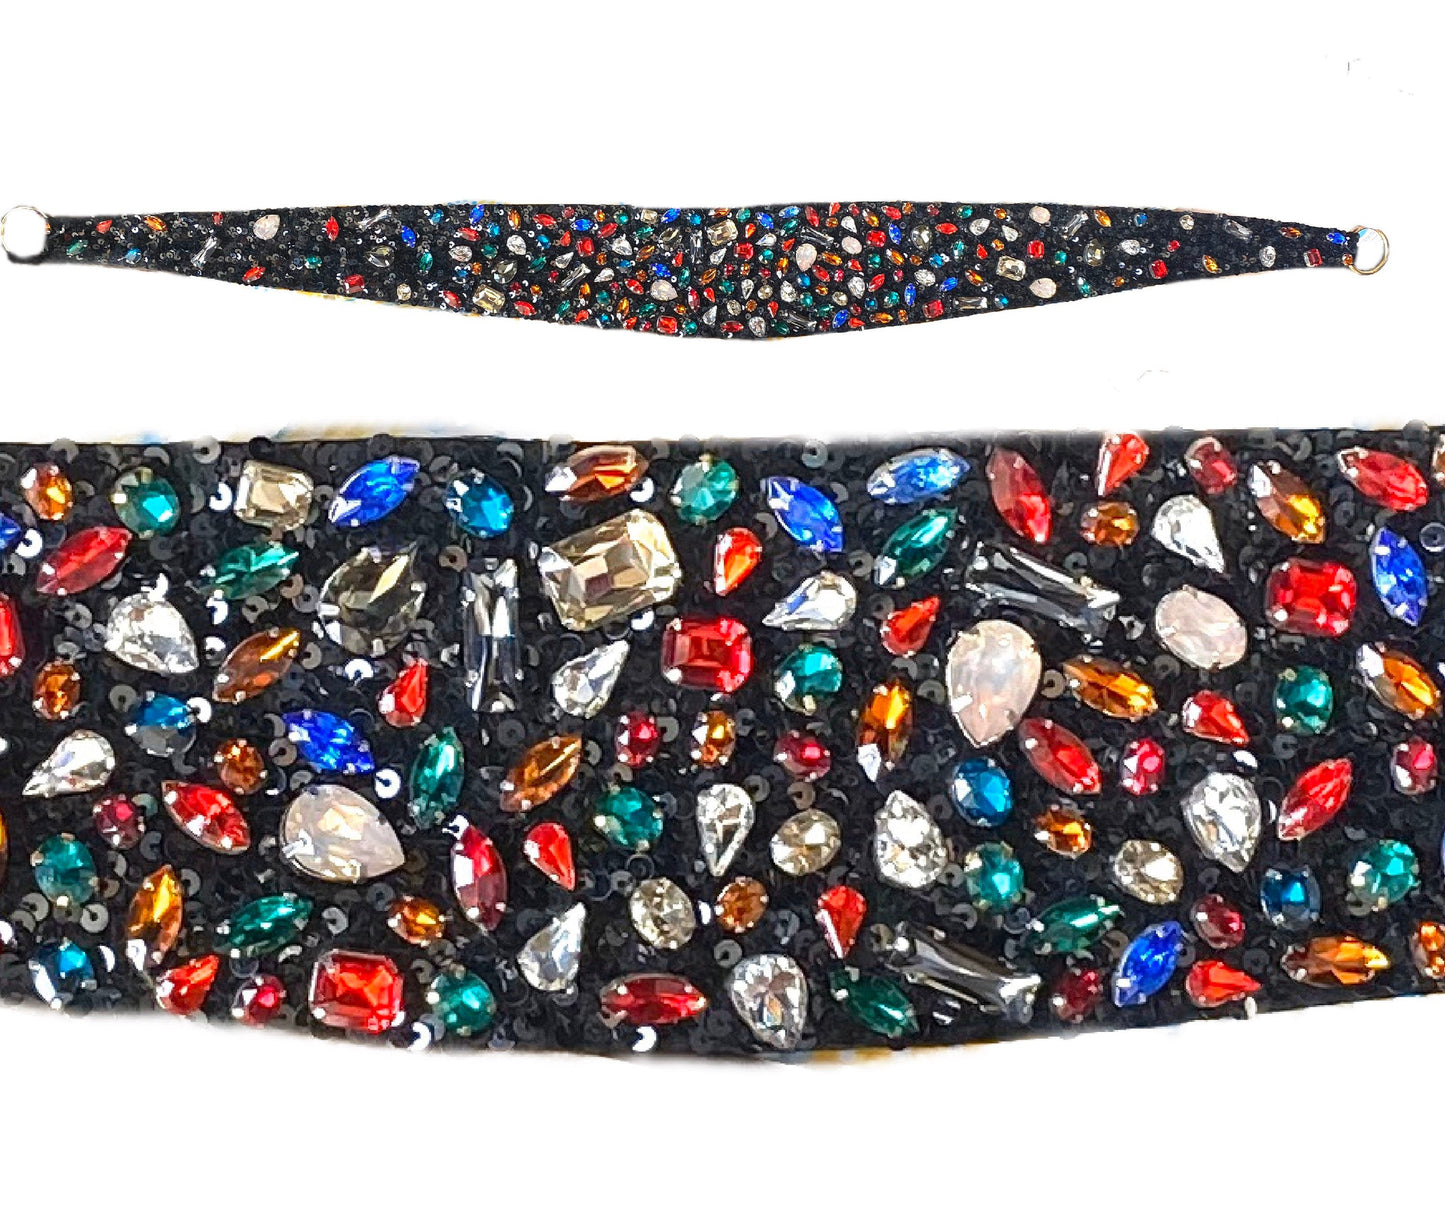 Precious Hand embroidered ladies belt fully coated in Rhinestones and sequins, 4 colorways, exclusive for Viceversa